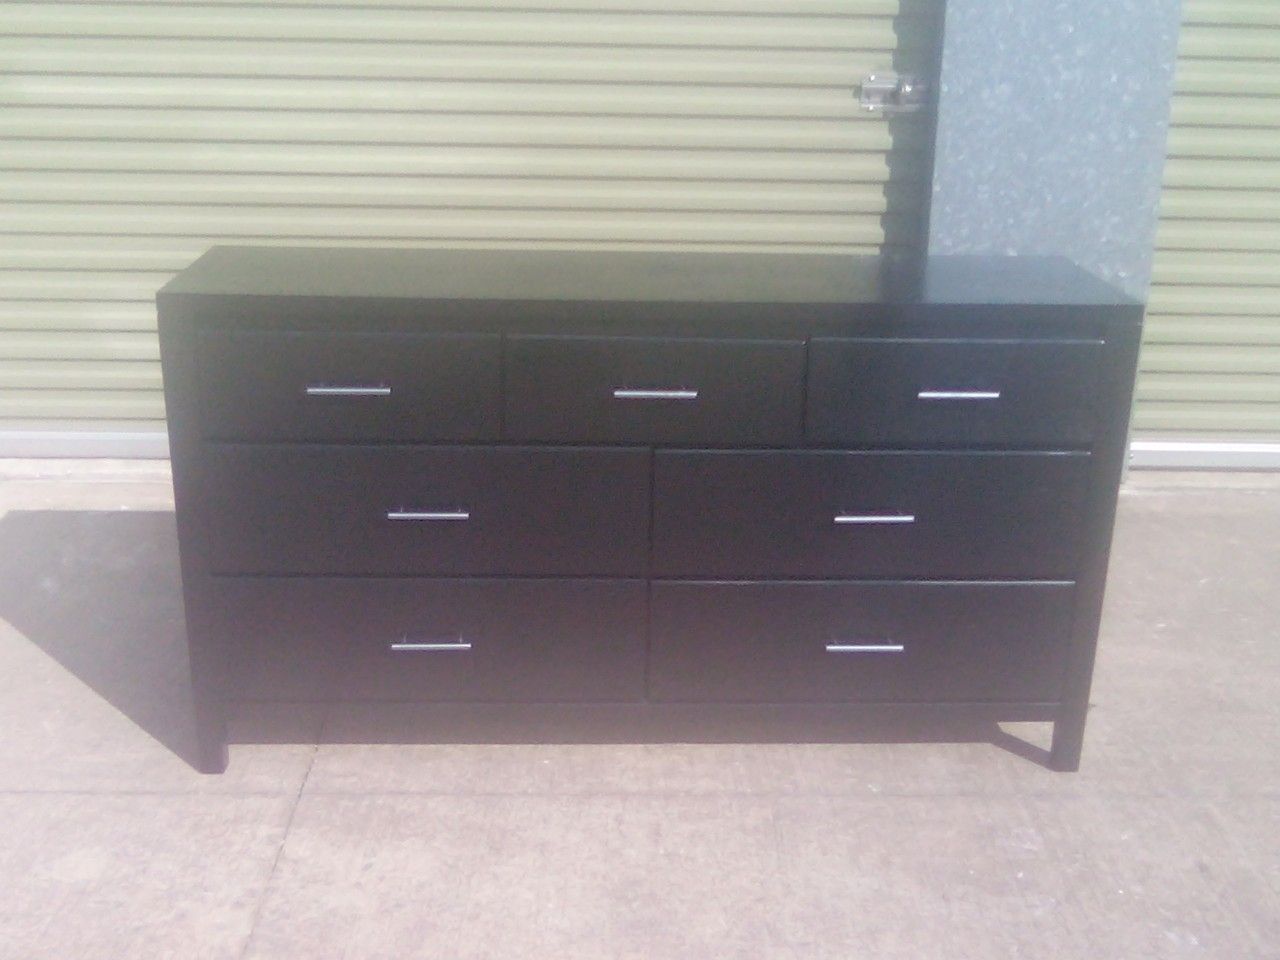 Gloss black Dresser in good condition drawers fuction well it's wood with slot of life